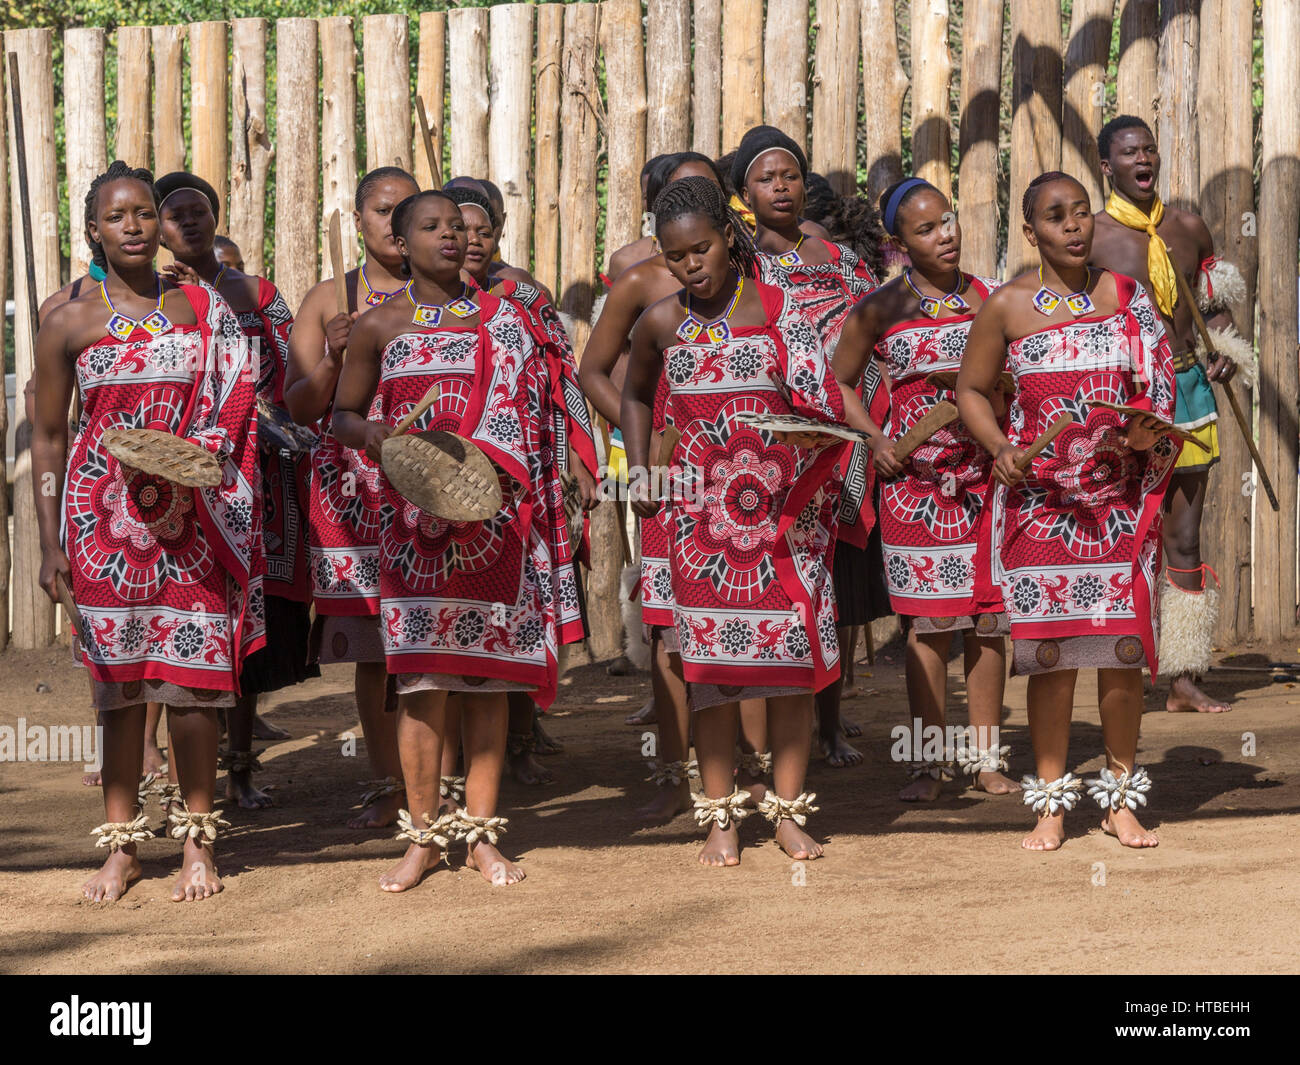 Women in traditional clothing during dance performance, Swazi cultural  village, Lobamba, Manzini, Swaziland Stock Photo - Alamy